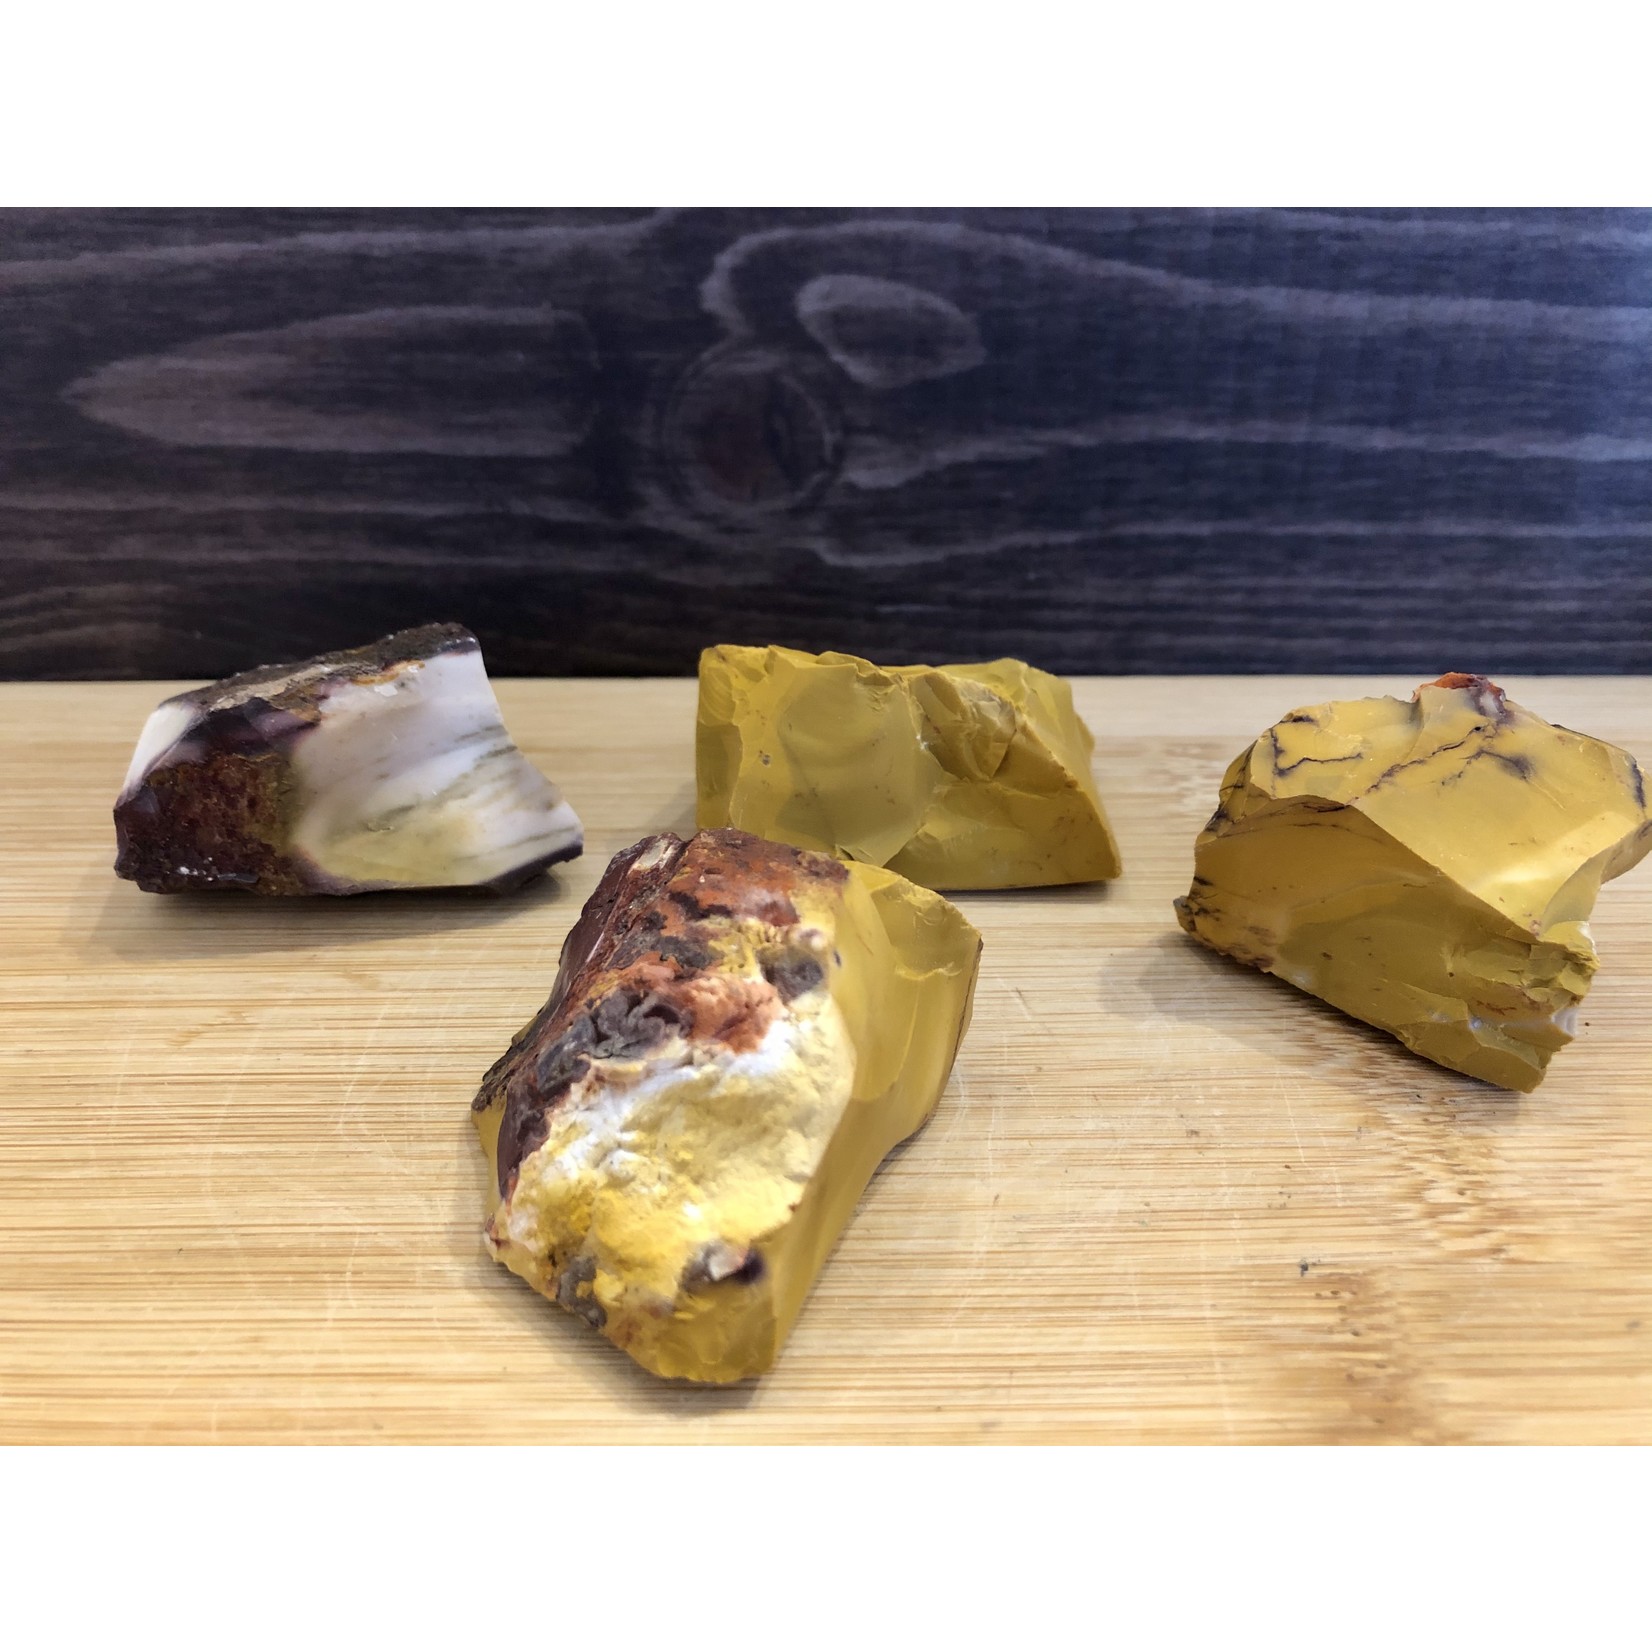 superb pieces of raw mookaite jasper, natural mookaite jasper, promotes the instincts to overcome conflict situations